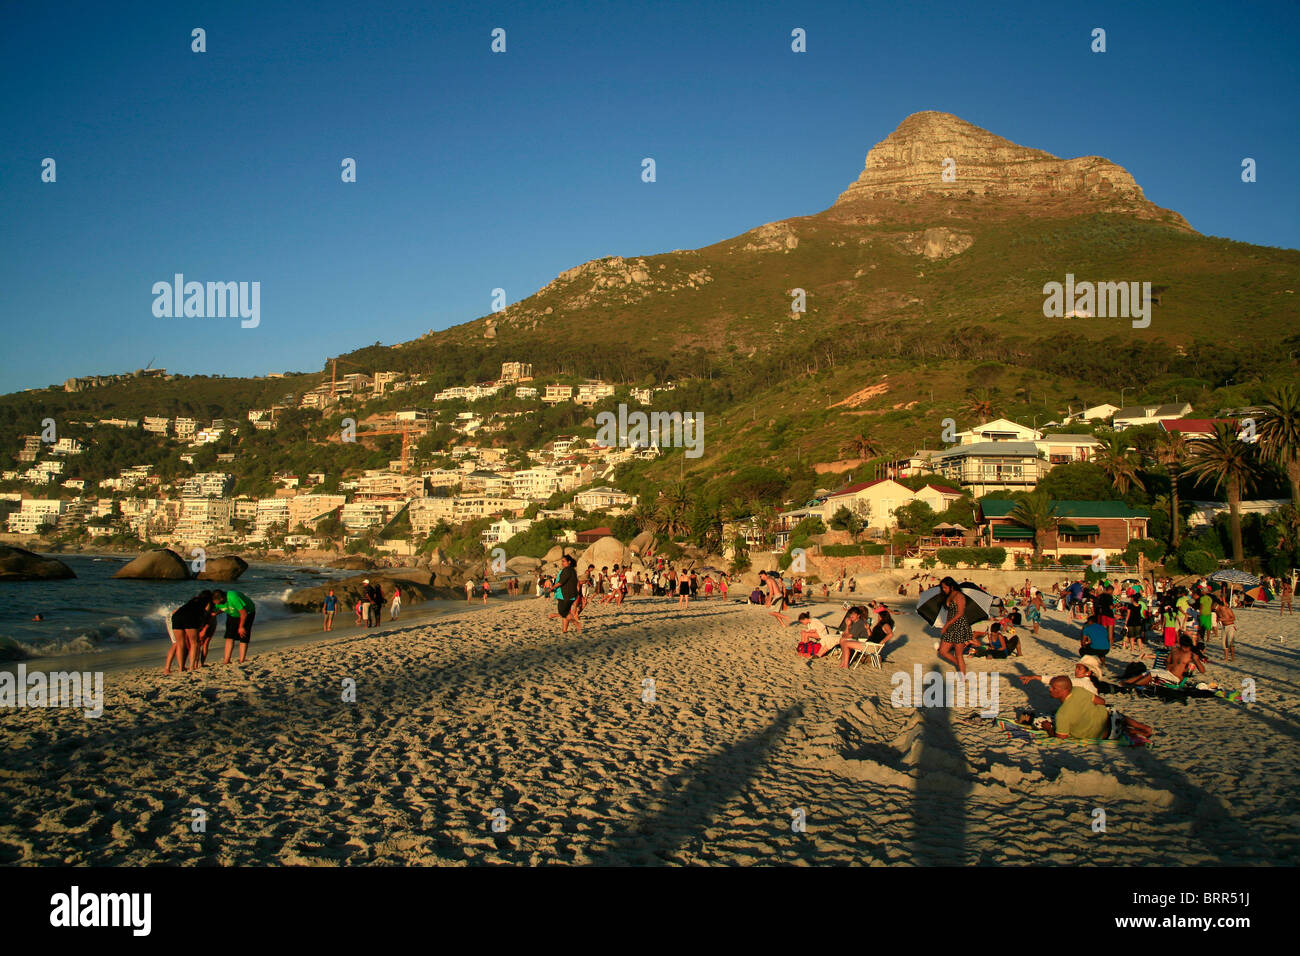 People relaxing on Clifton's fourth beach at sunset, Lions Head in the background Stock Photo